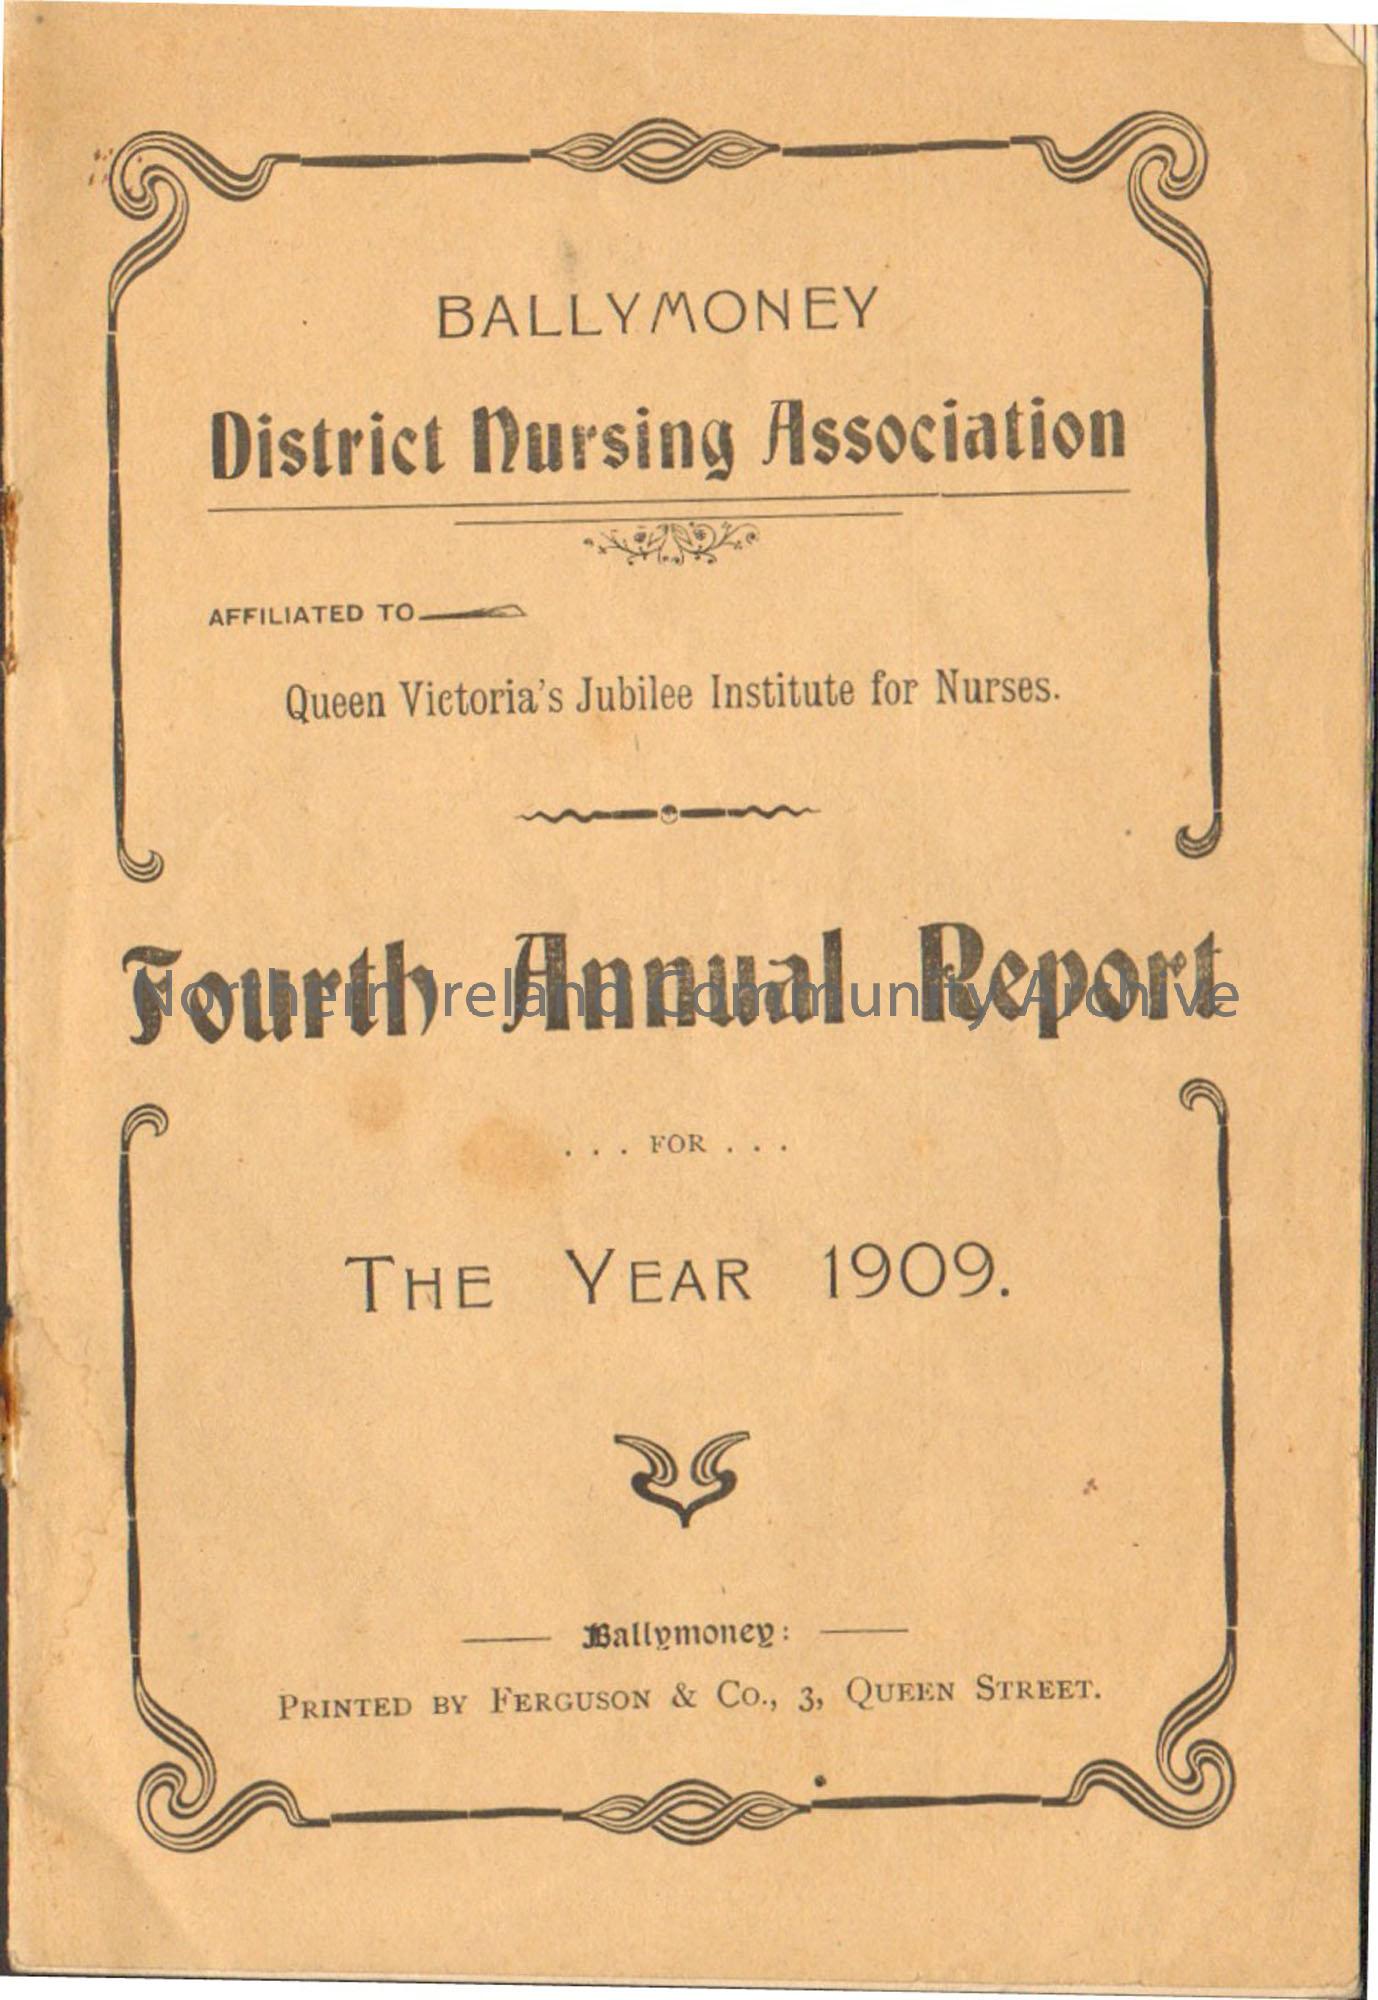 Cream booklet. Fourth Annual Report for the Ballymoney District Nursing Association for the year 1909